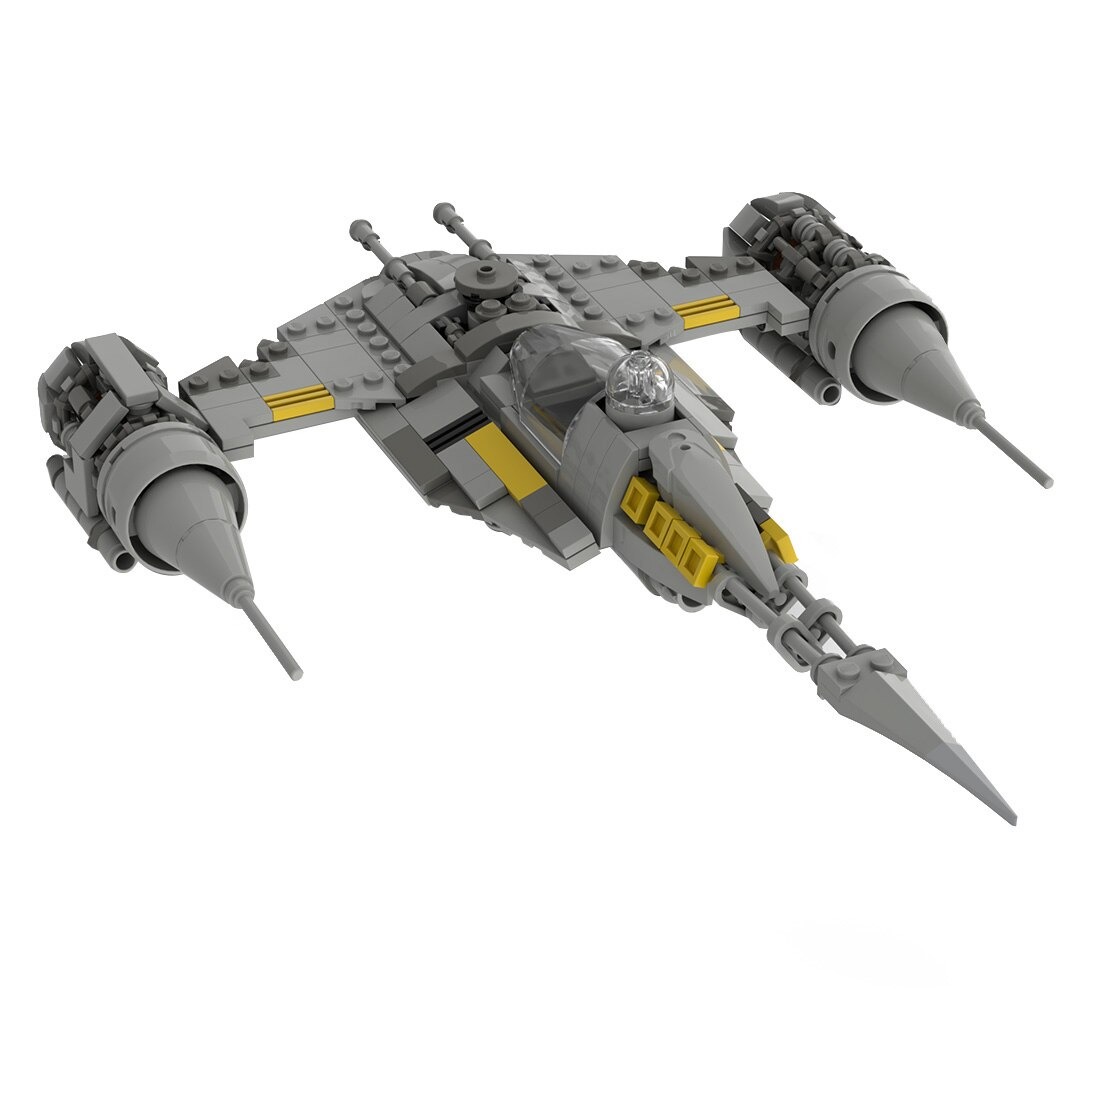 authorized moc 100546 n 1 starfighter bui main 2 1 - DECOOL